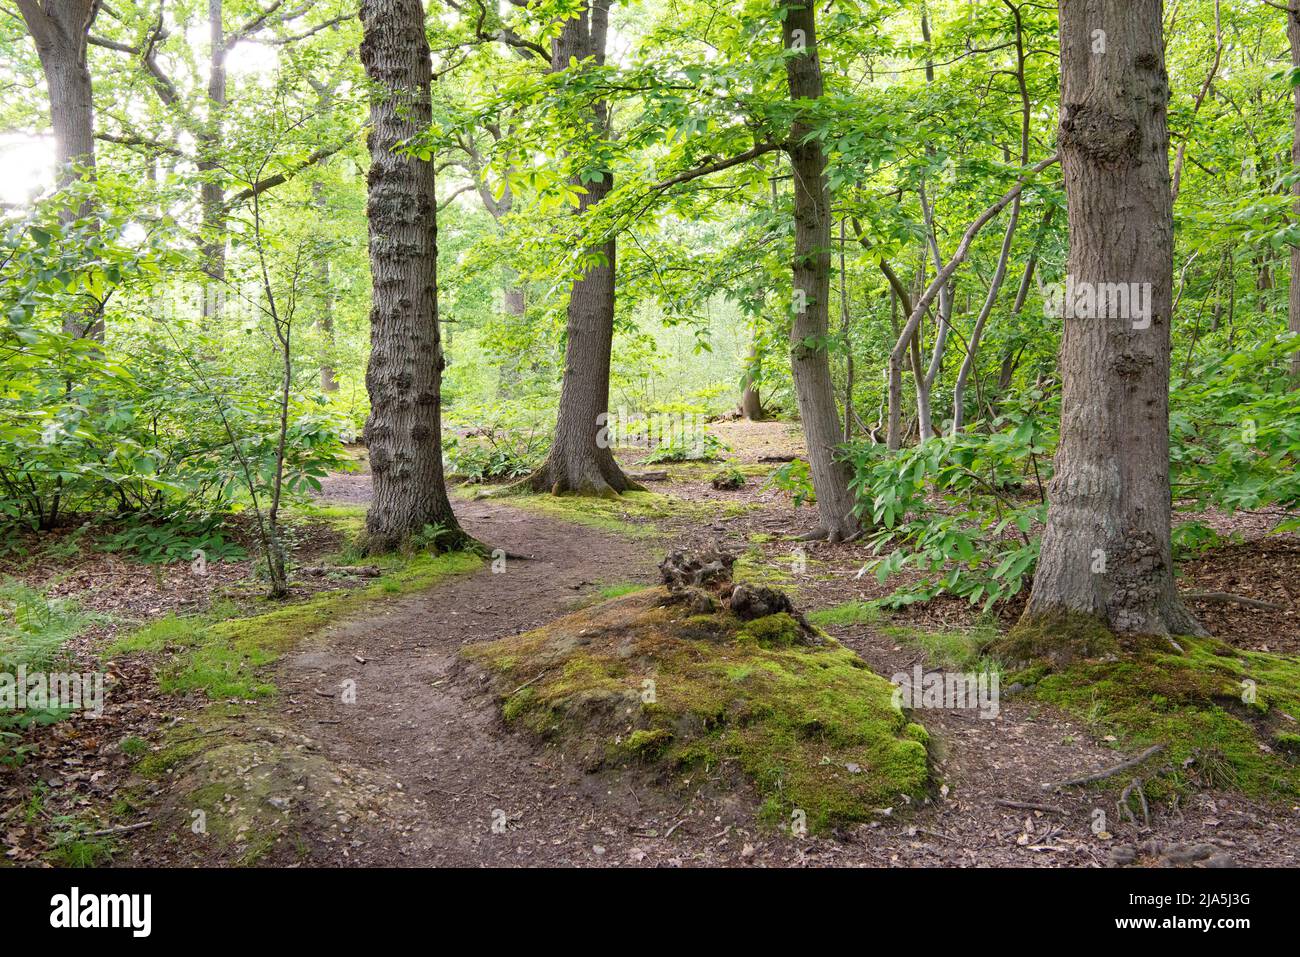 Mossy banks and a snaking path through woodland at Blean Woods RSPB, Kent, UK Stock Photo